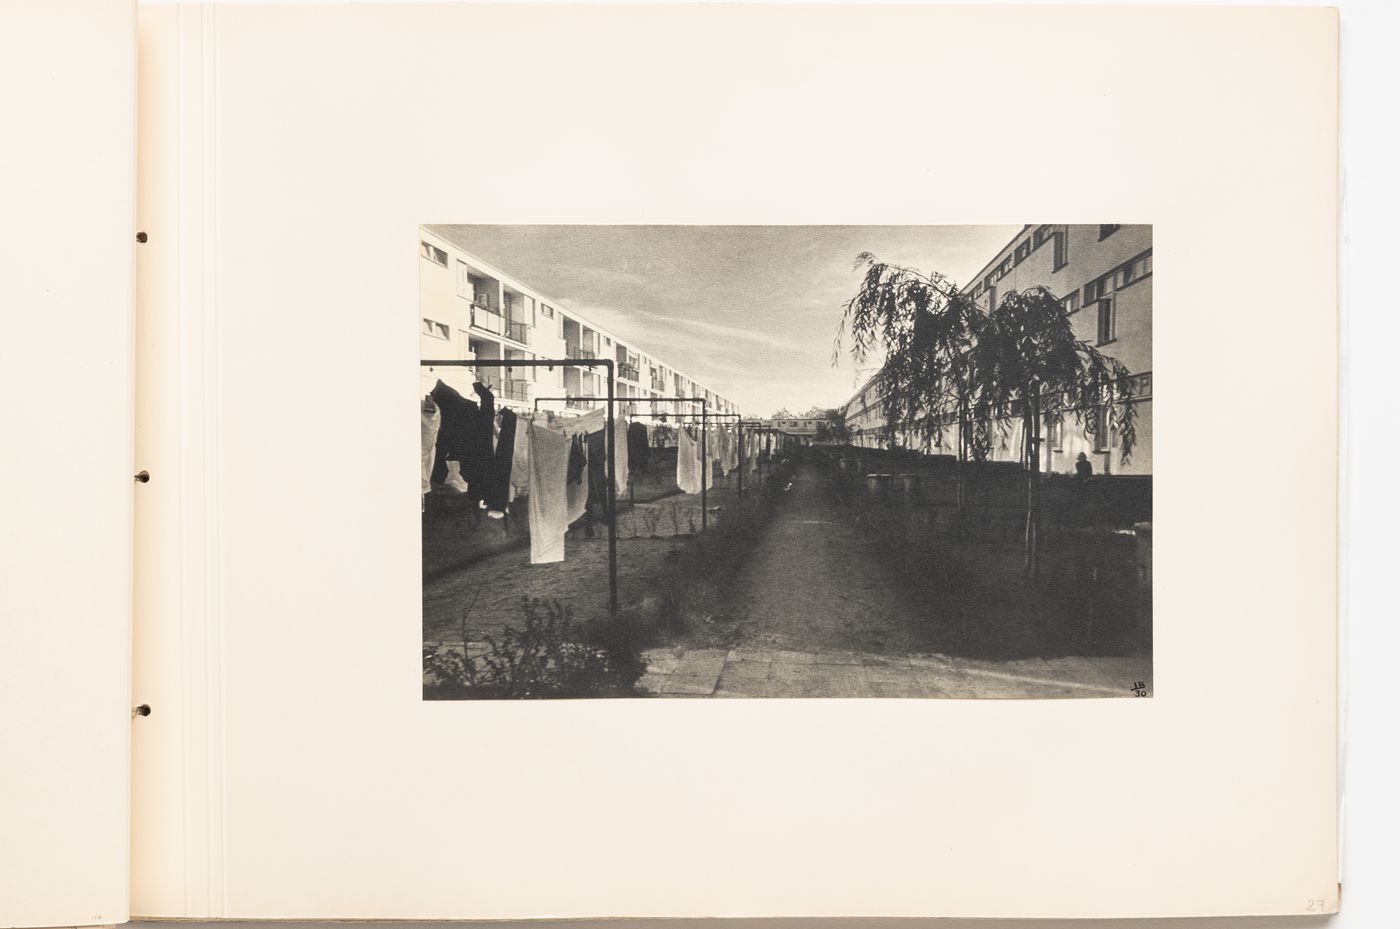 Exterior view showing gardens and clothes lines between type A housing units, Hellerhof Housing Estate, Frankfurt am Main, Germany